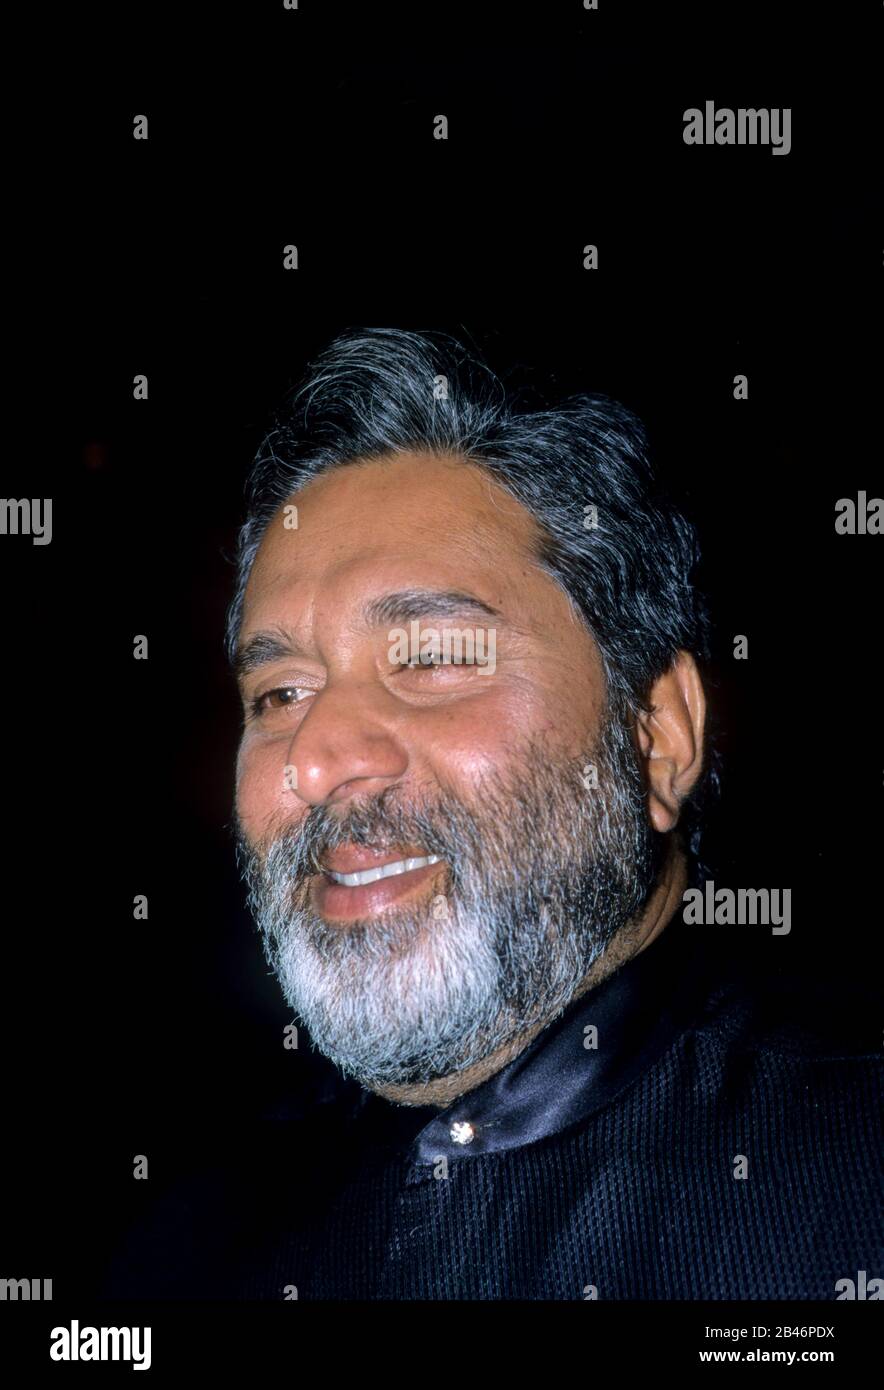 Vijay Vittal Mallya ; Indian businessman and former Member of Parliament ; former owner of the Royal Challengers Bangalore cricket team ; India ; Asia Stock Photo